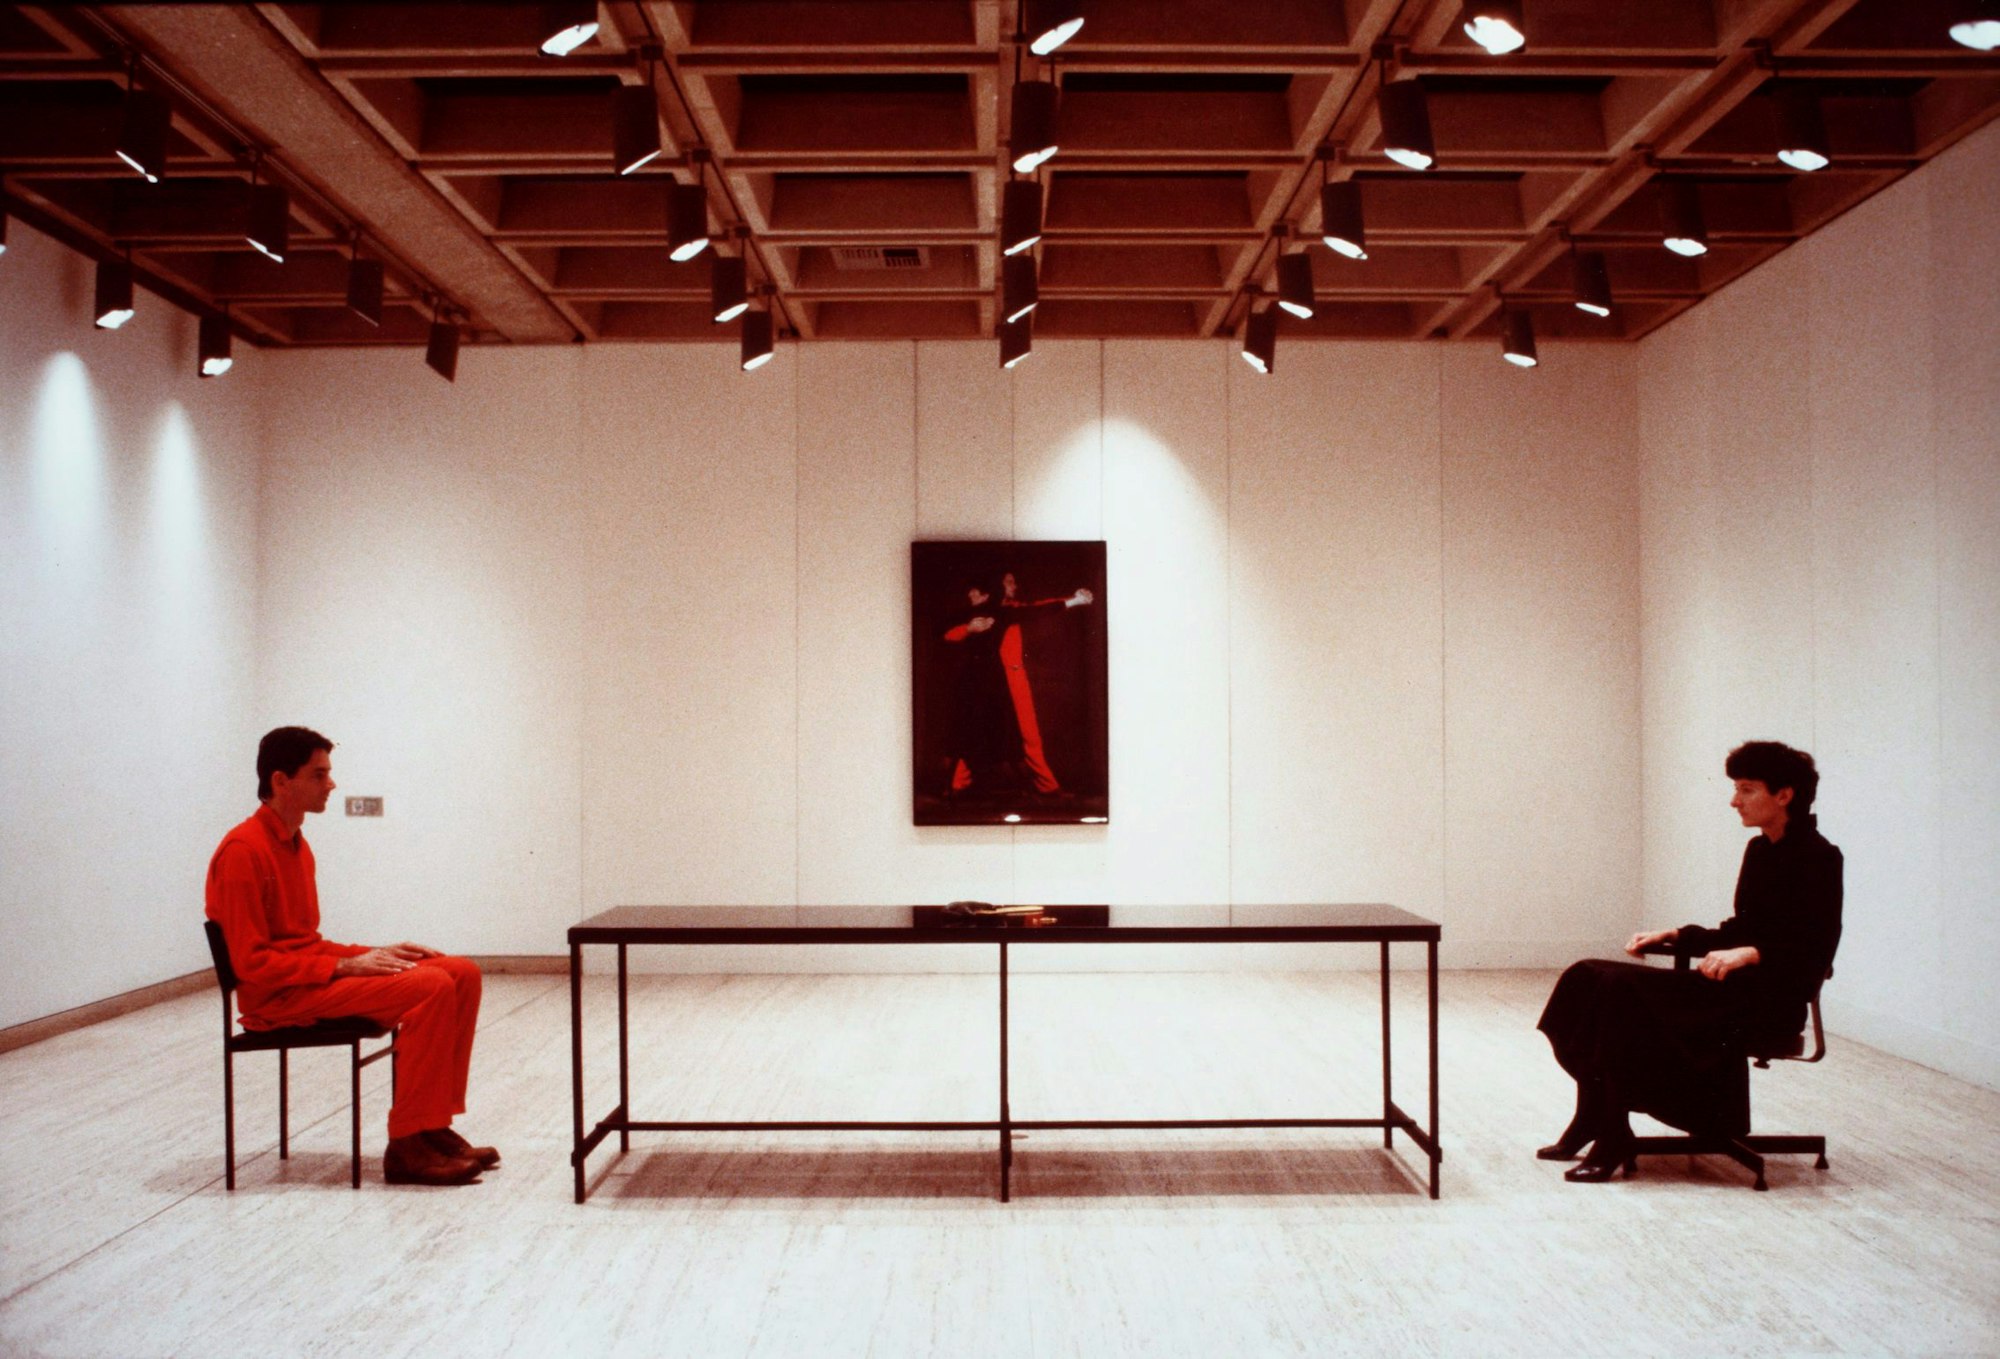 In a gallery space, two people sit looking at each other from opposite ends of a long table. An artwork hangs on the far wall.